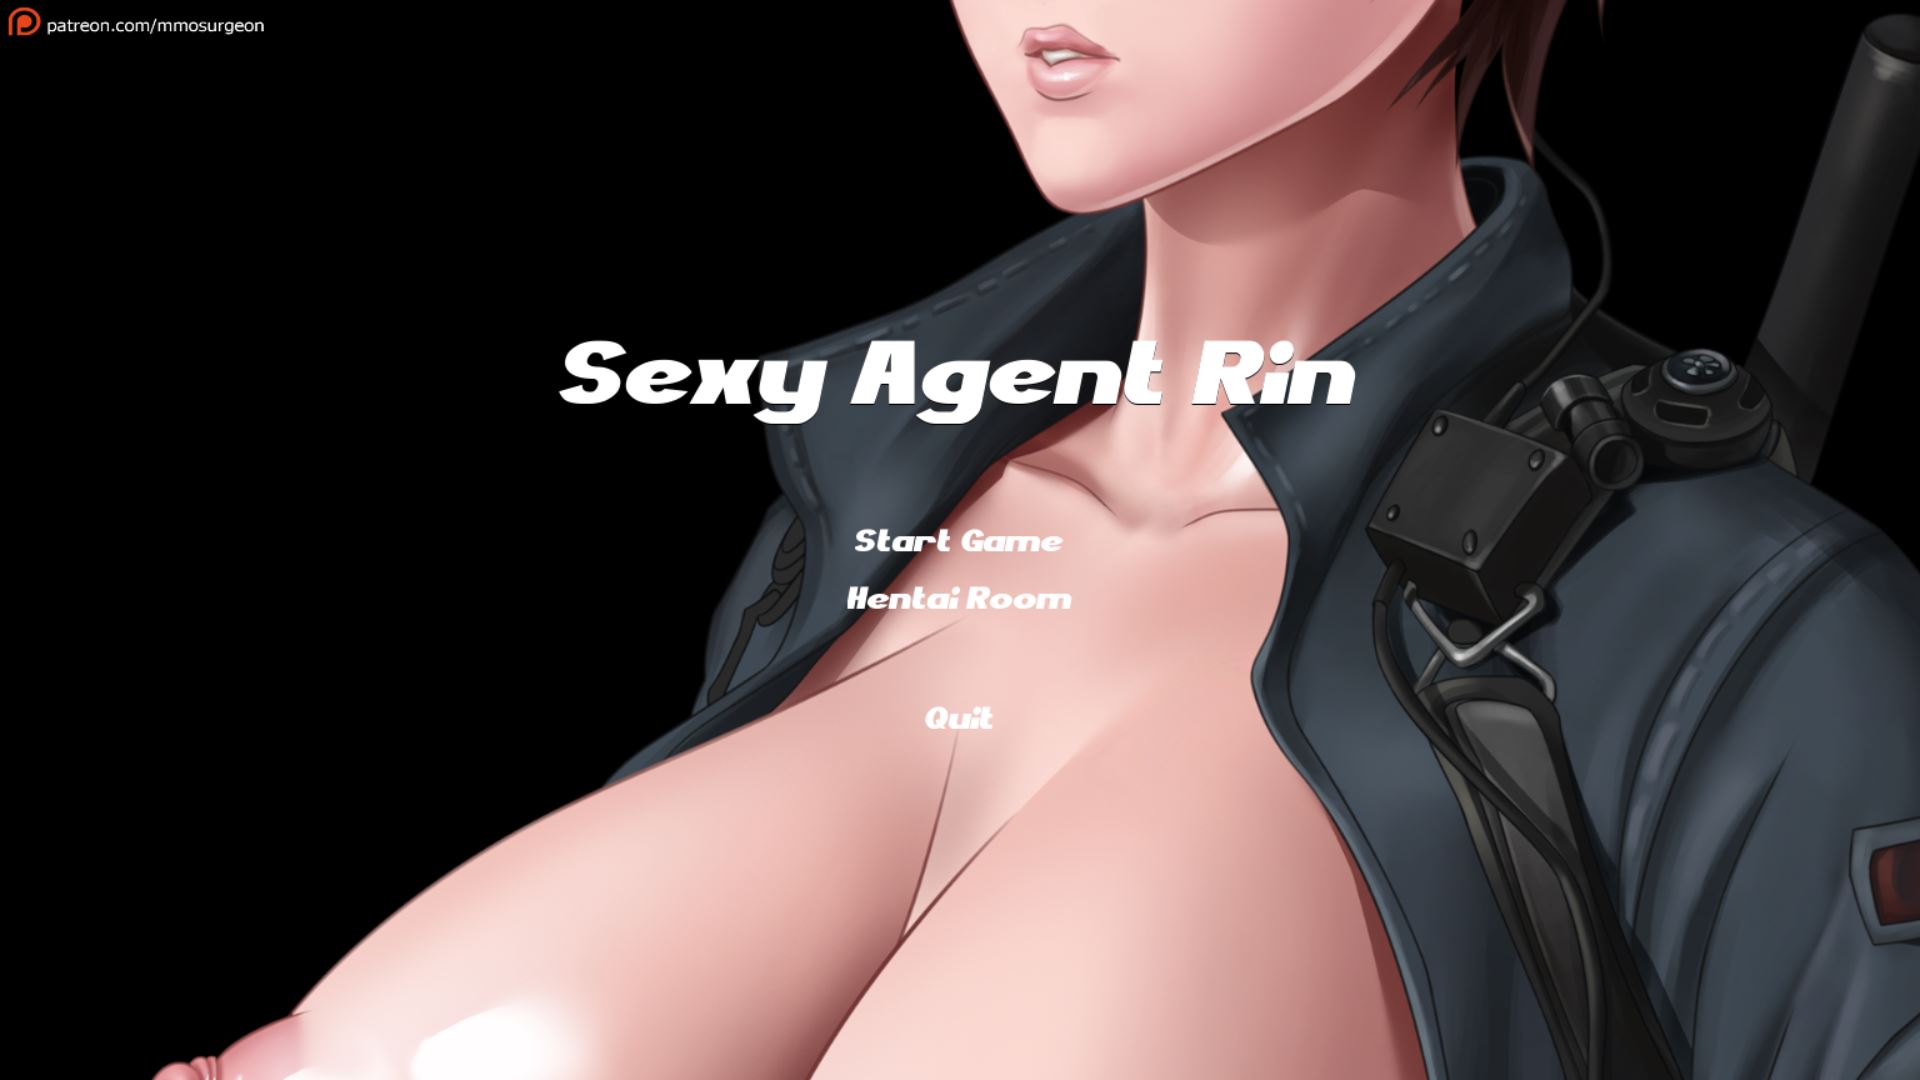 Hentai Adult Sexy - Hentai Shooter: Sexy Agent Rin Unreal Engine Porn Sex Game v.Final Download  for Windows